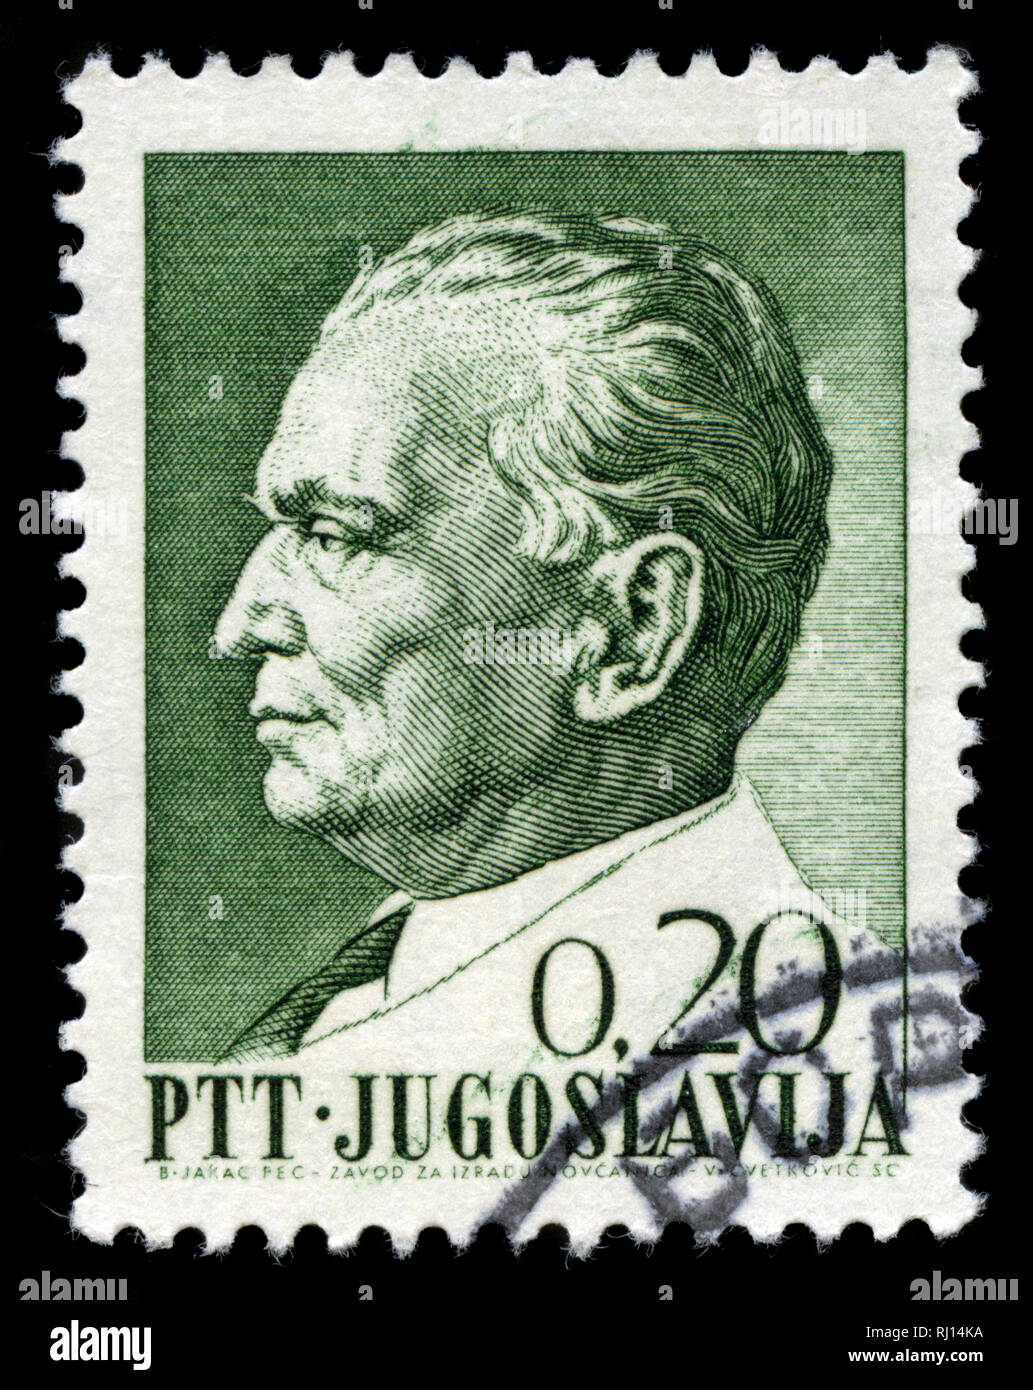 Postage stamp from the former state of Yugoslavia in the President Tito series issued in 1967 Stock Photo